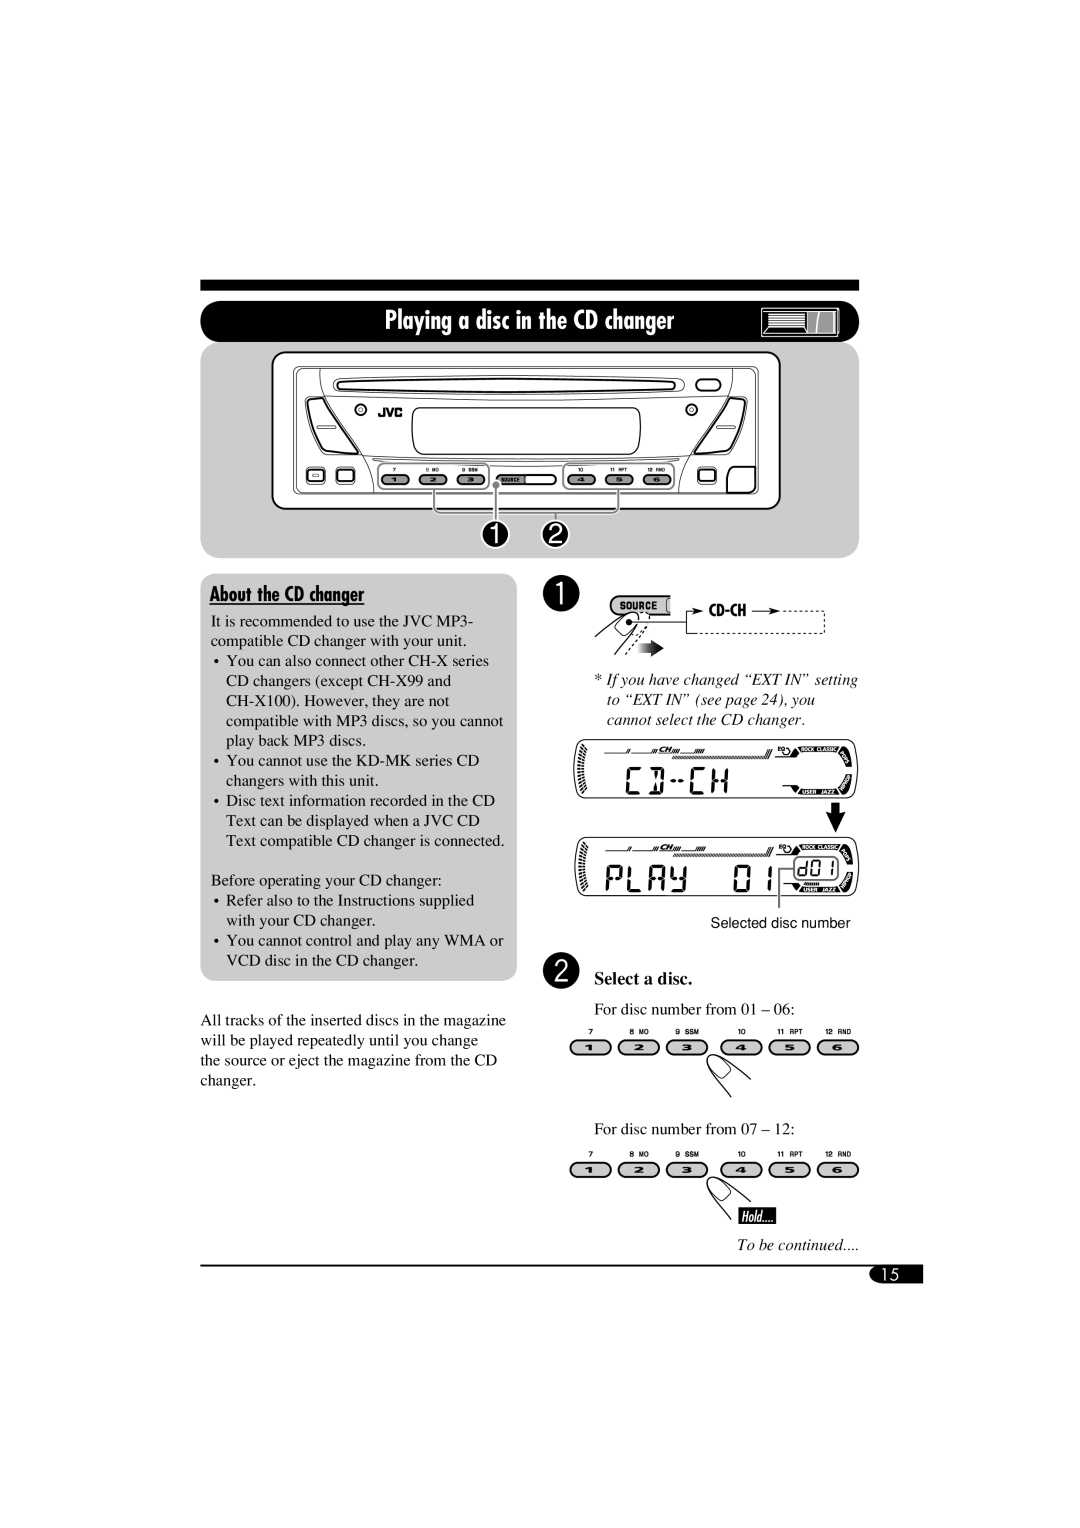 JVC KD-SV3104 manual Playing a disc in the CD changer, About the CD changer, ŸSelect a disc 